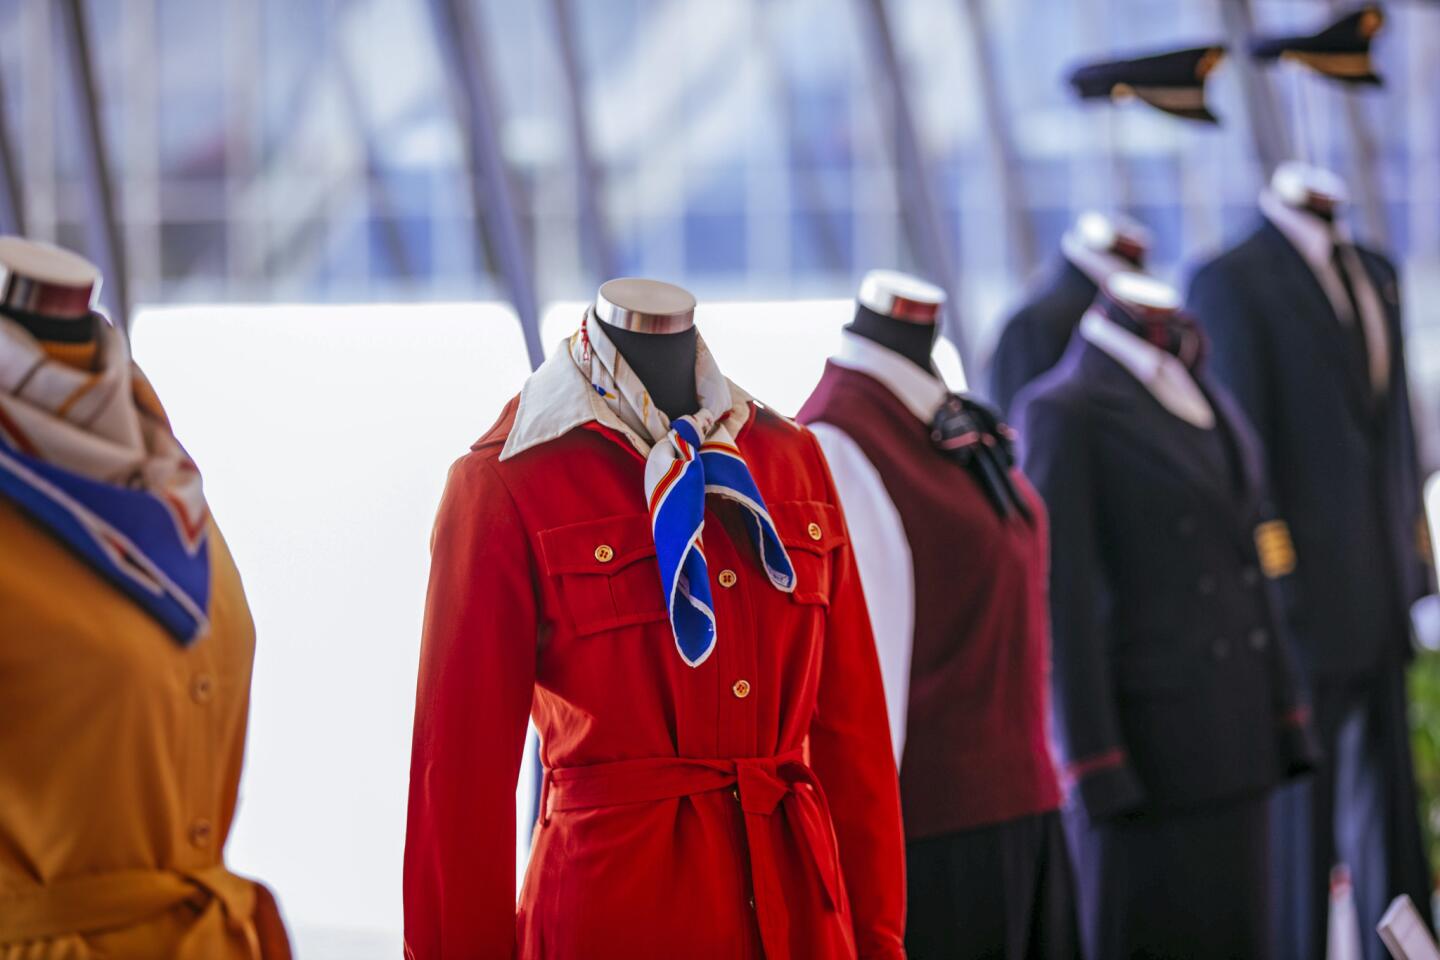 Vintage TWA uniforms are displayed in the new TWA Hotel at JFK.